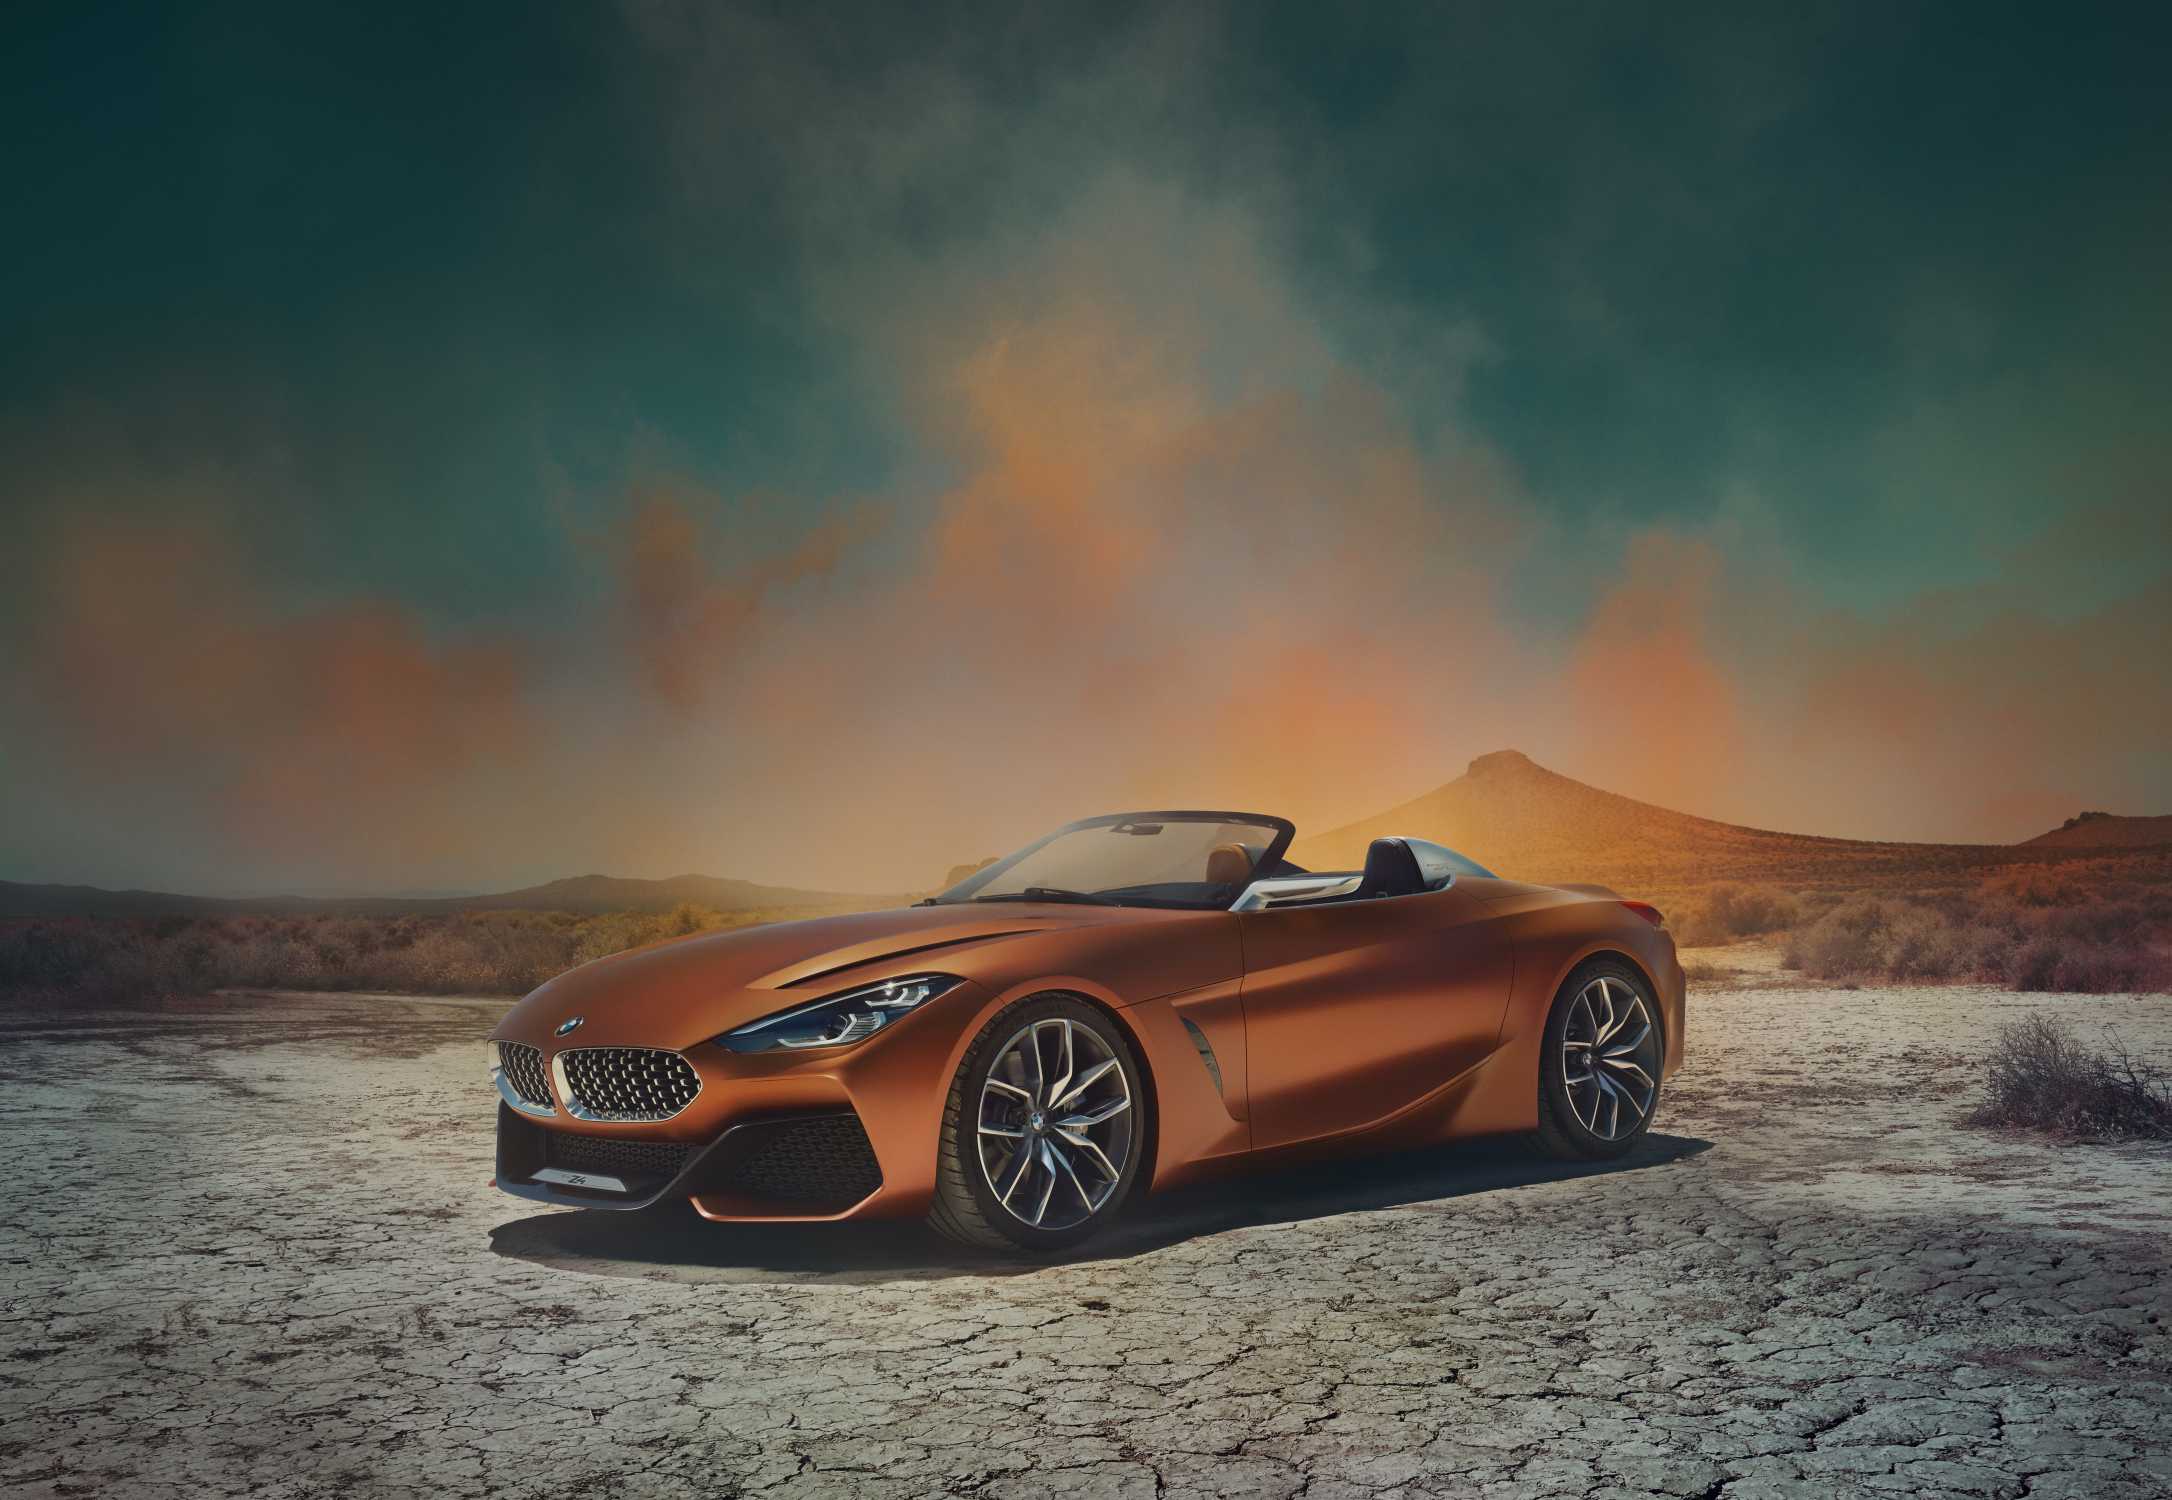 The BMW Concept Z4. Freedom on four wheels.